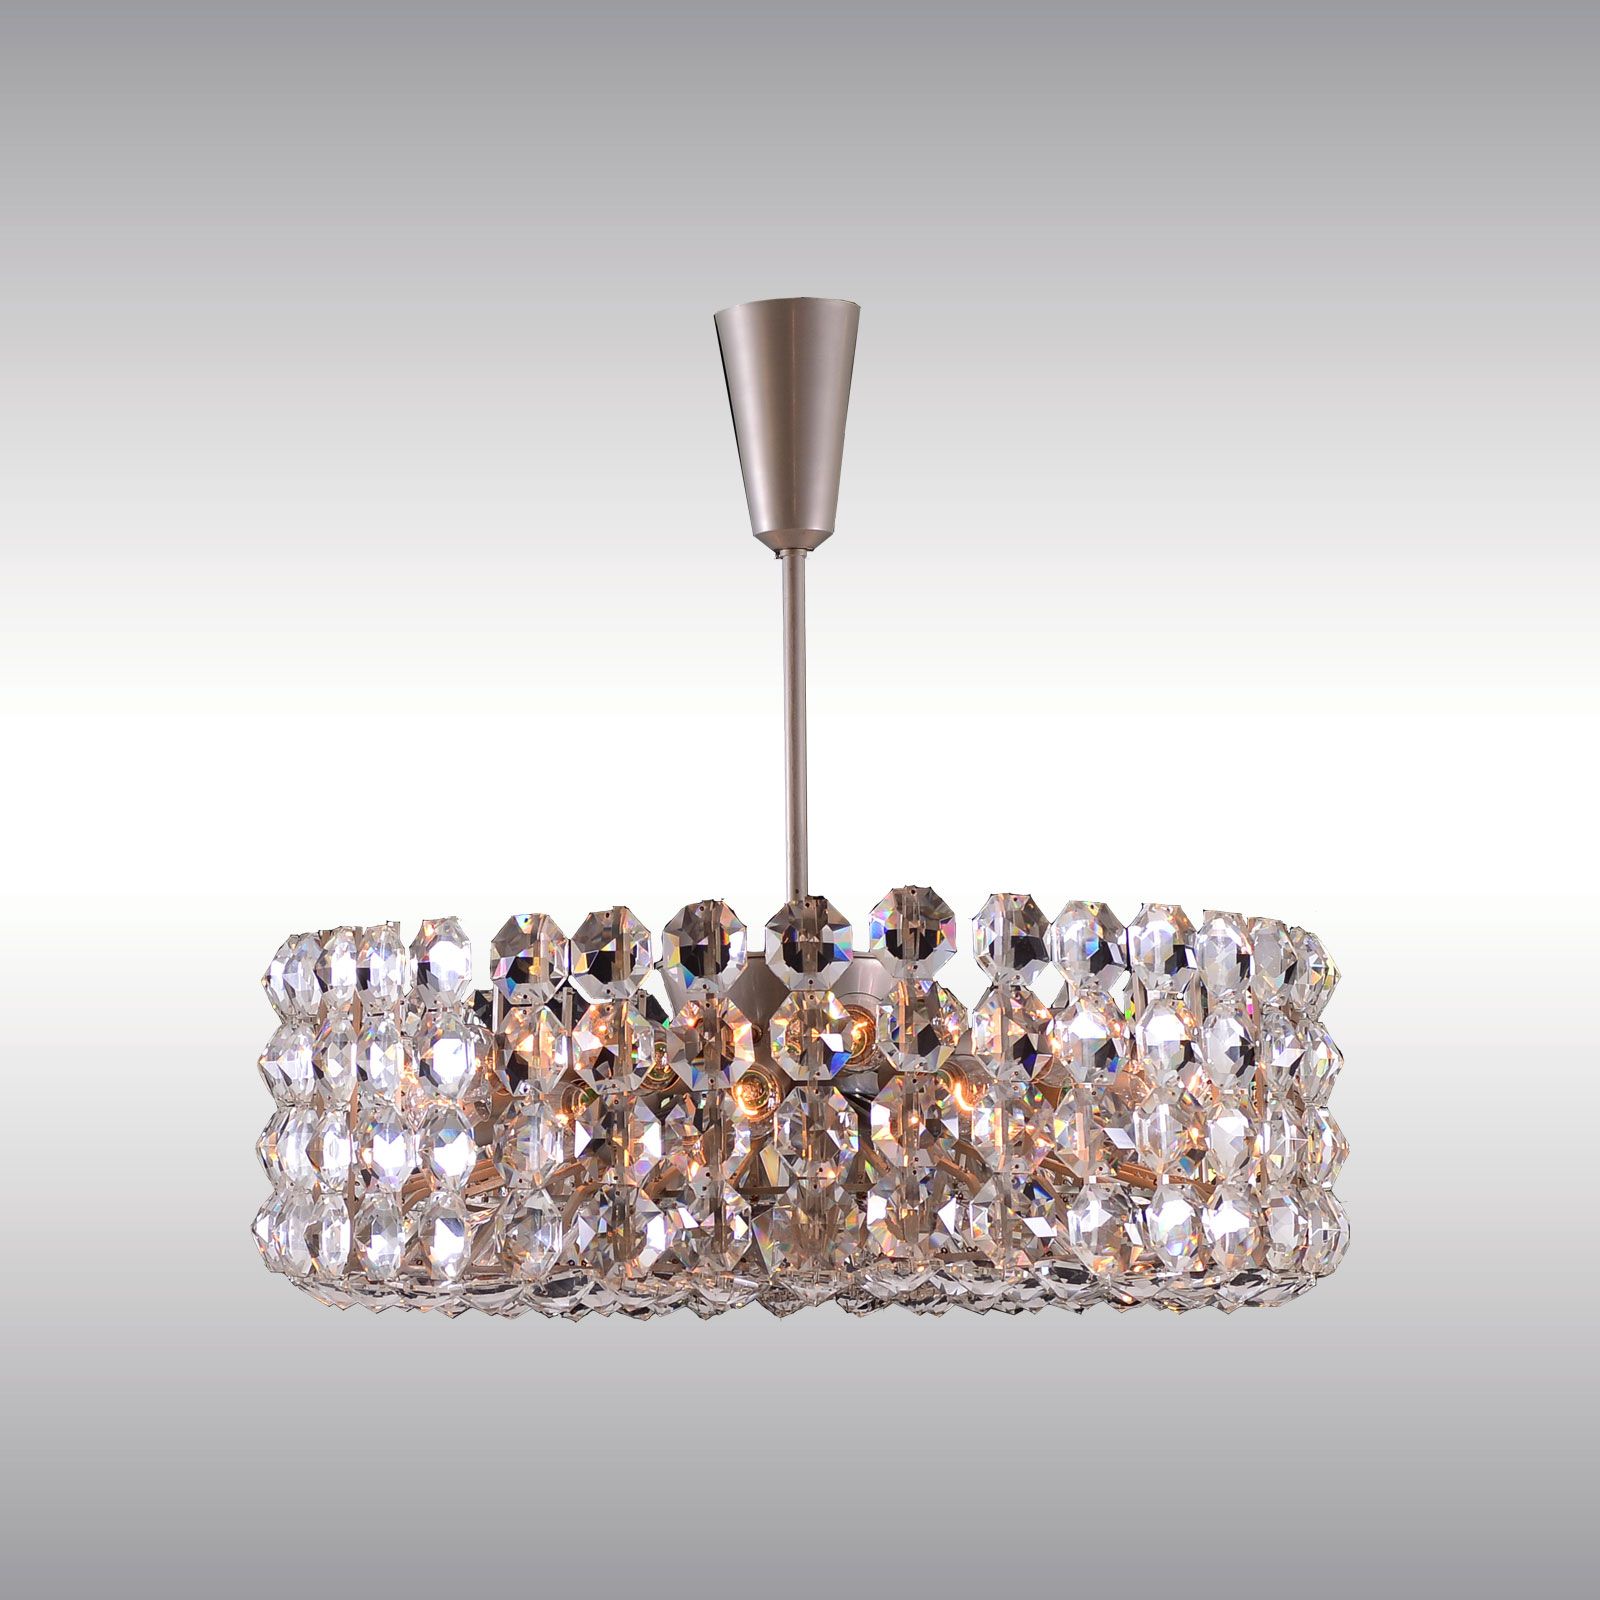 WOKA LAMPS VIENNA - OrderNr.: 60038|Very Large significant Bakalowits Chandelier mid century modern - Design: Bakalowits